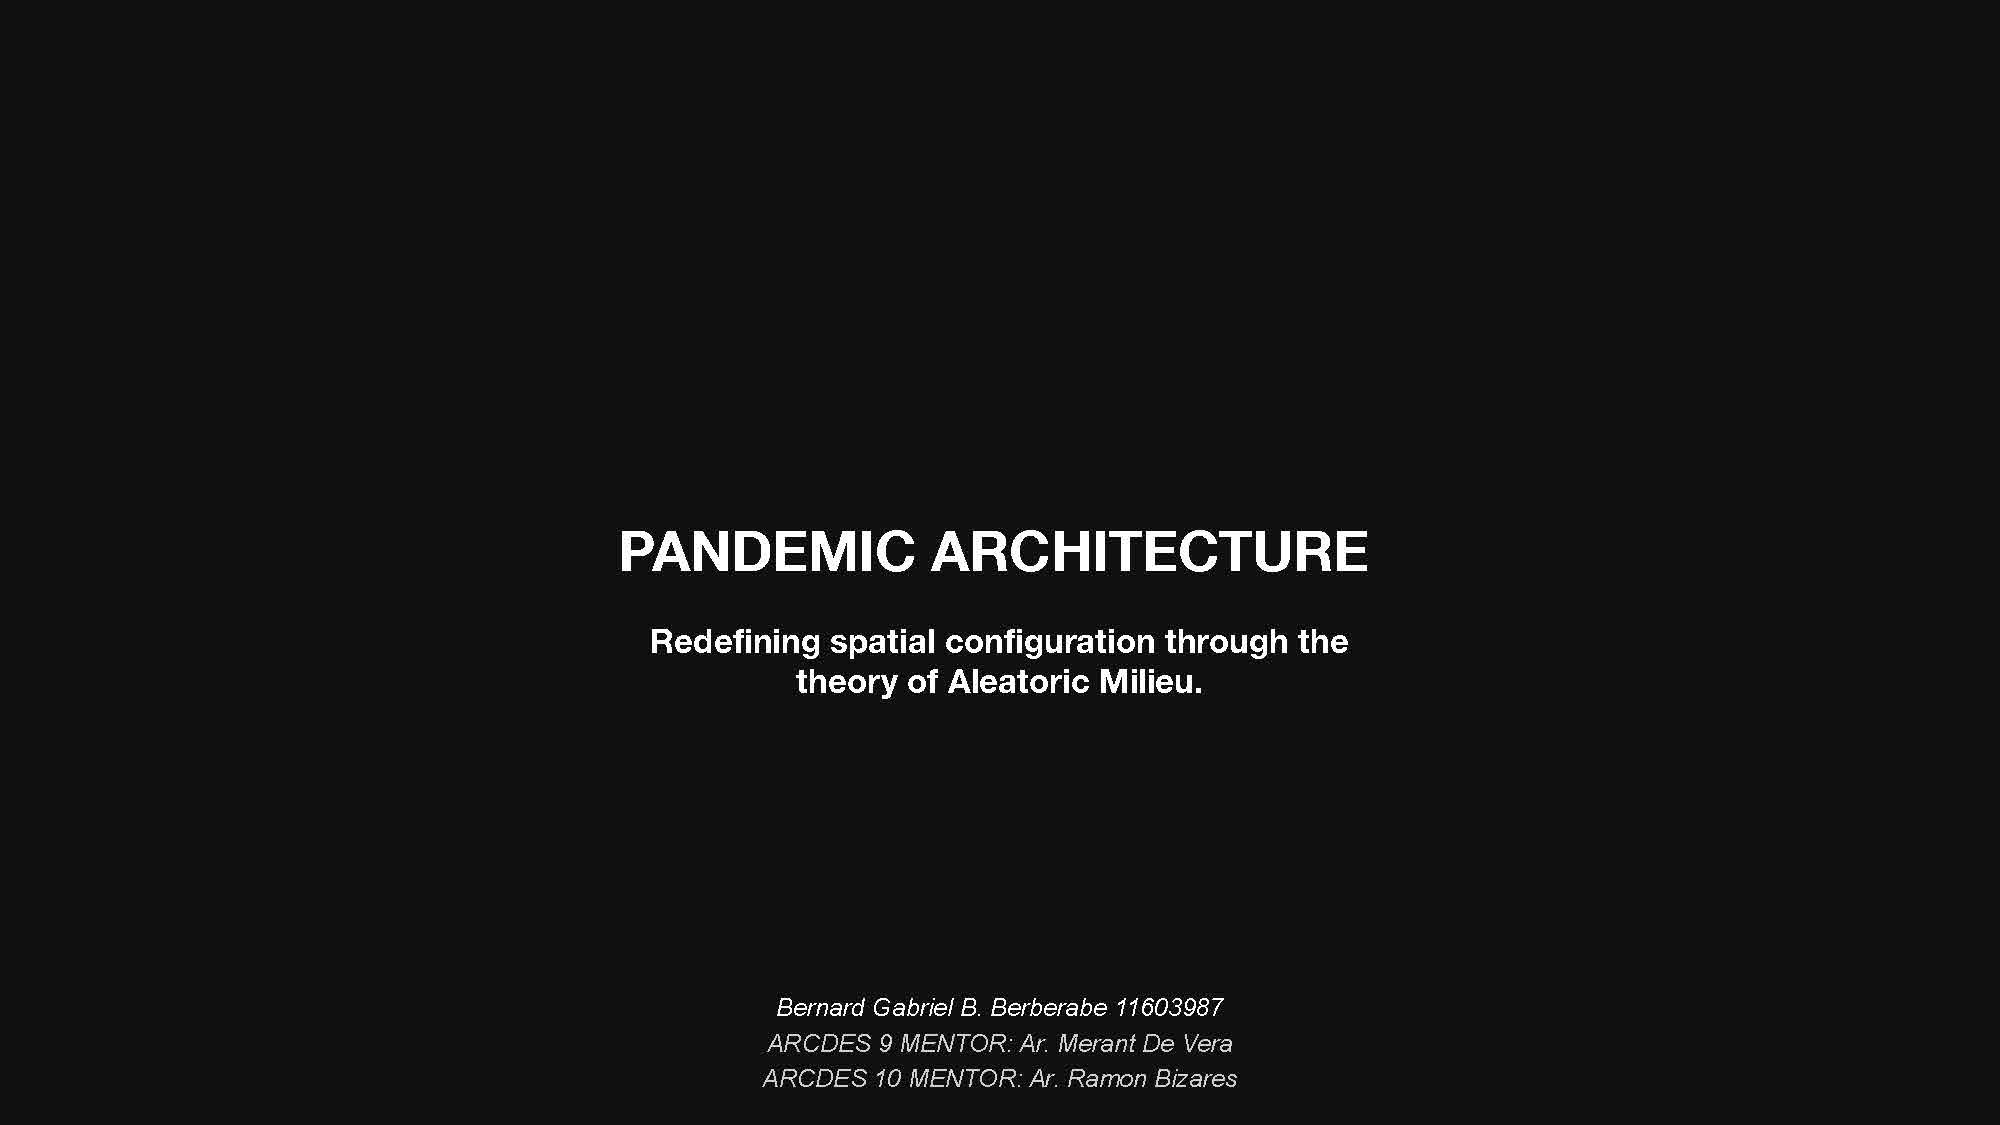 You are currently viewing Pandemic Architecture by BERBERABE, BERNARD GABRIEL